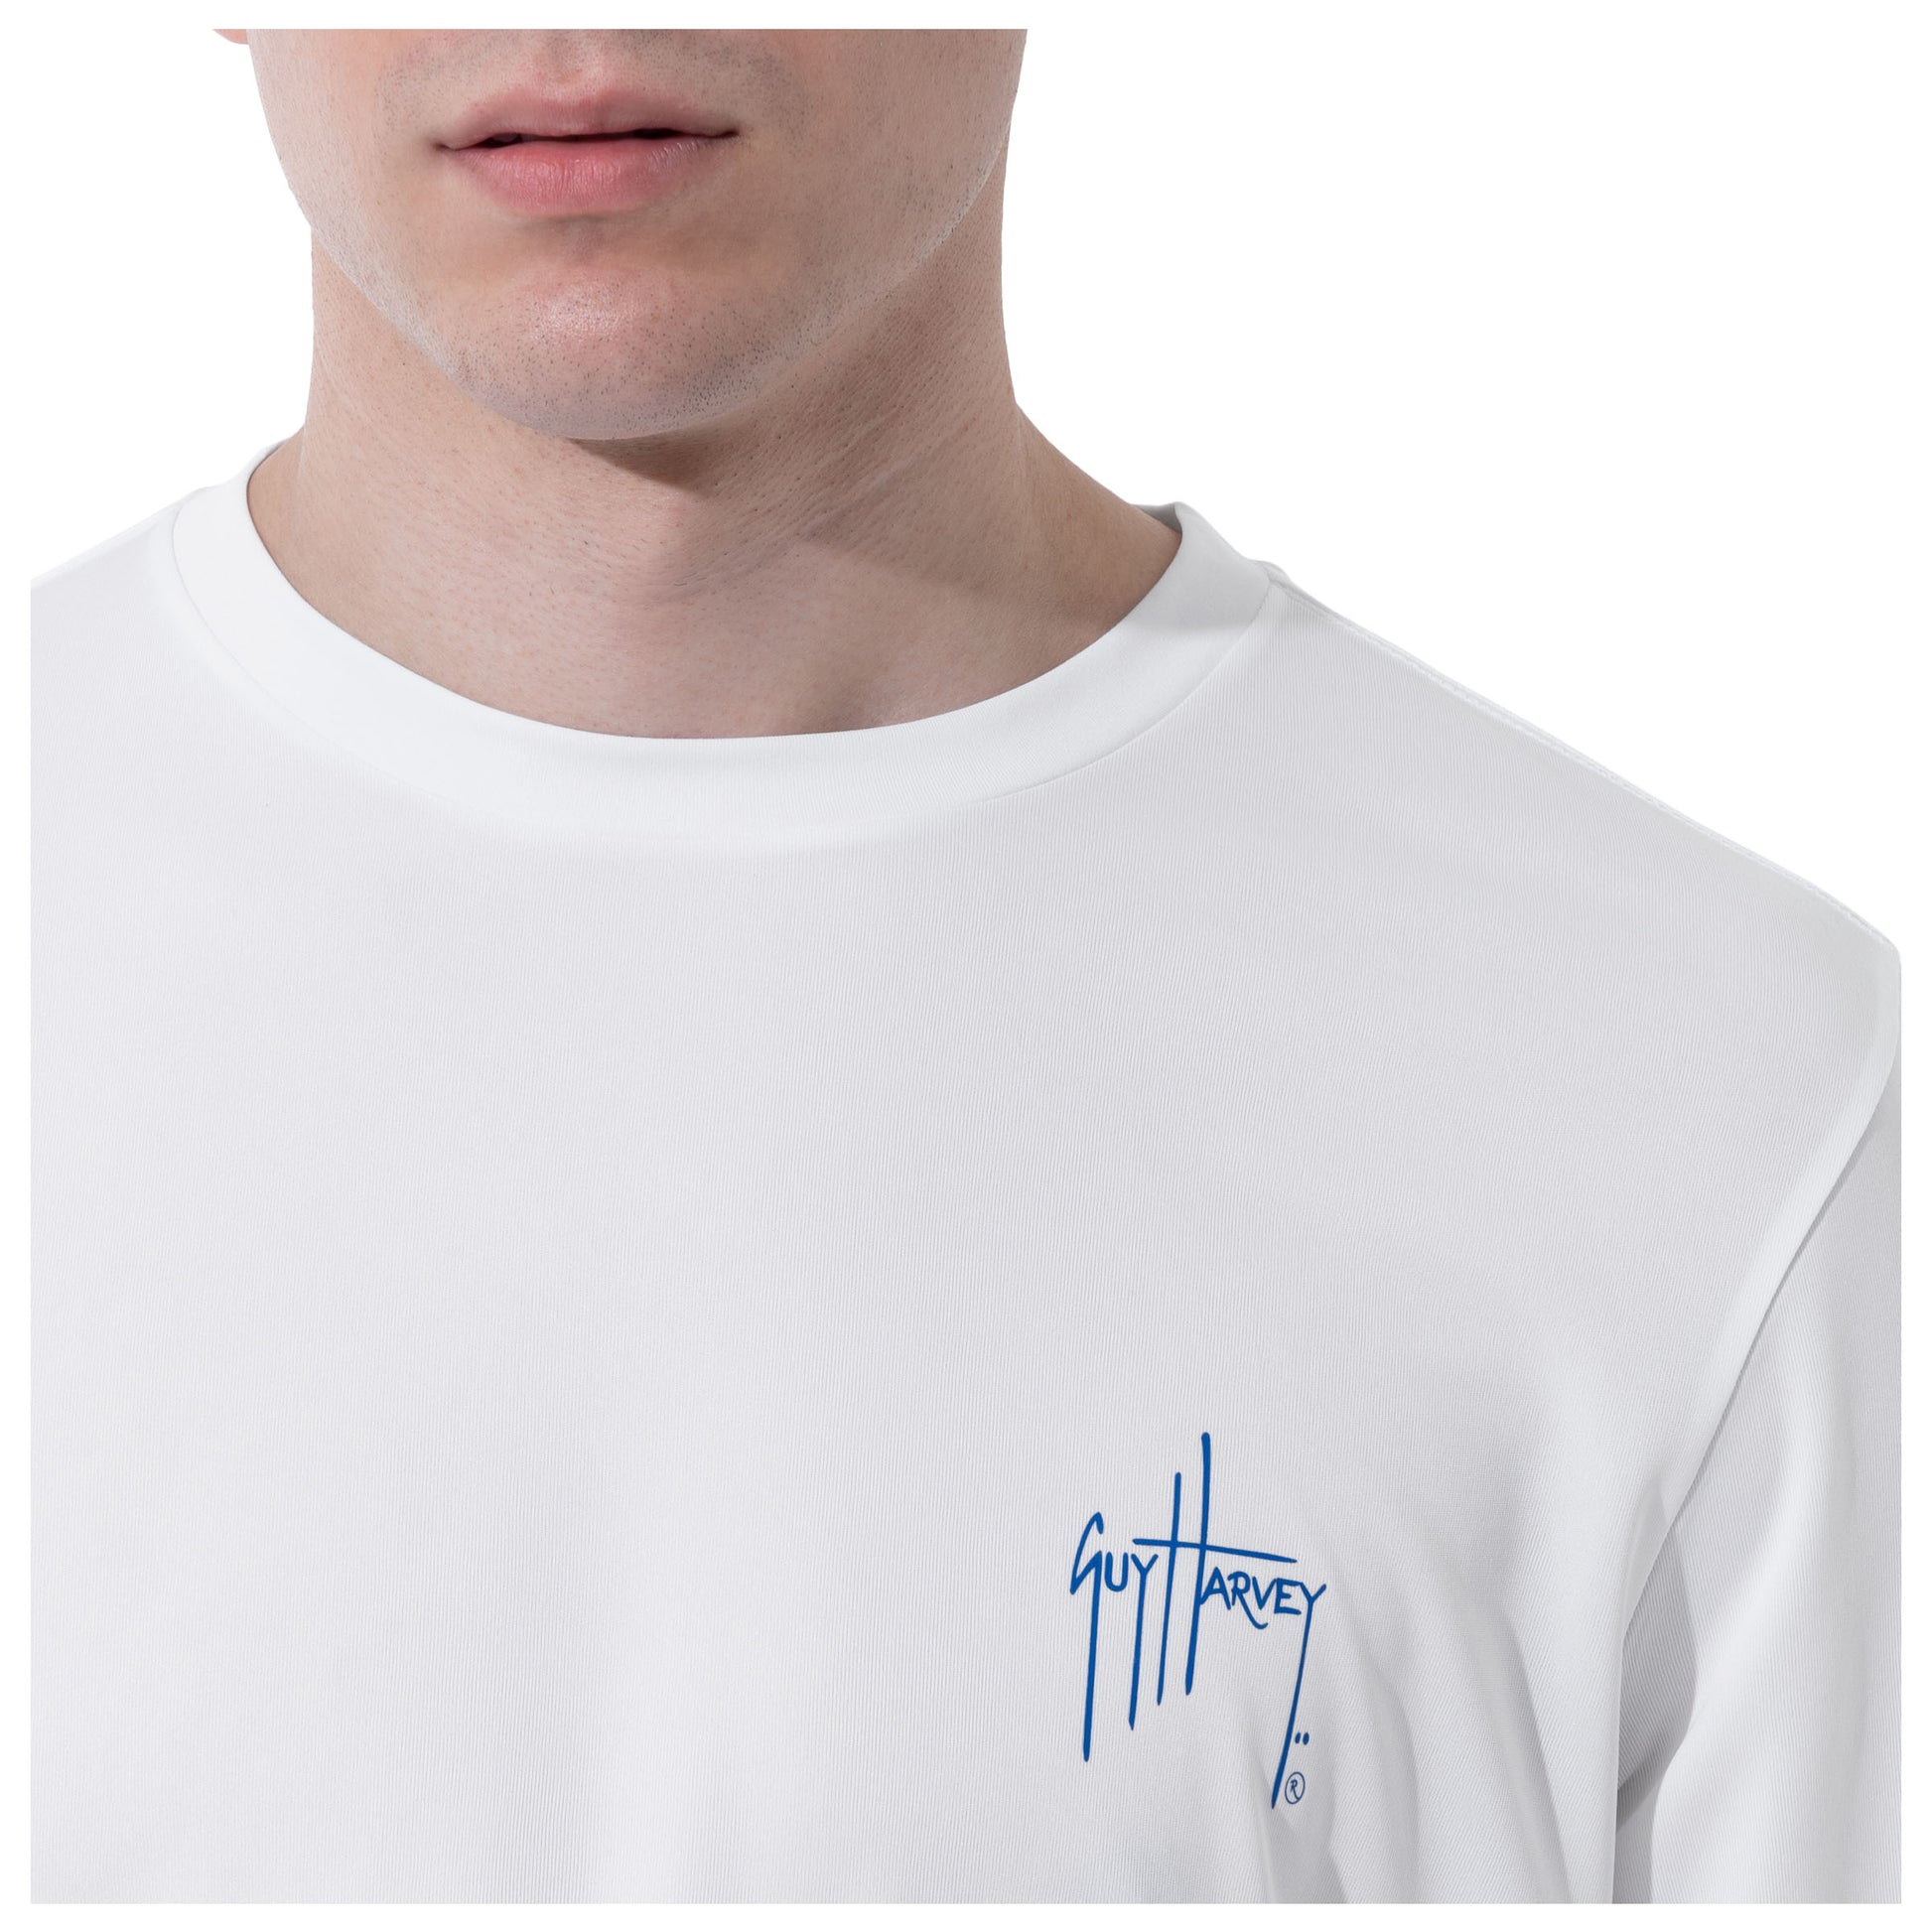 Men Long Sleeve Performance Fishing Sun Protection with UPF 50 Plus. Color White Guy Harvey signature on the chest